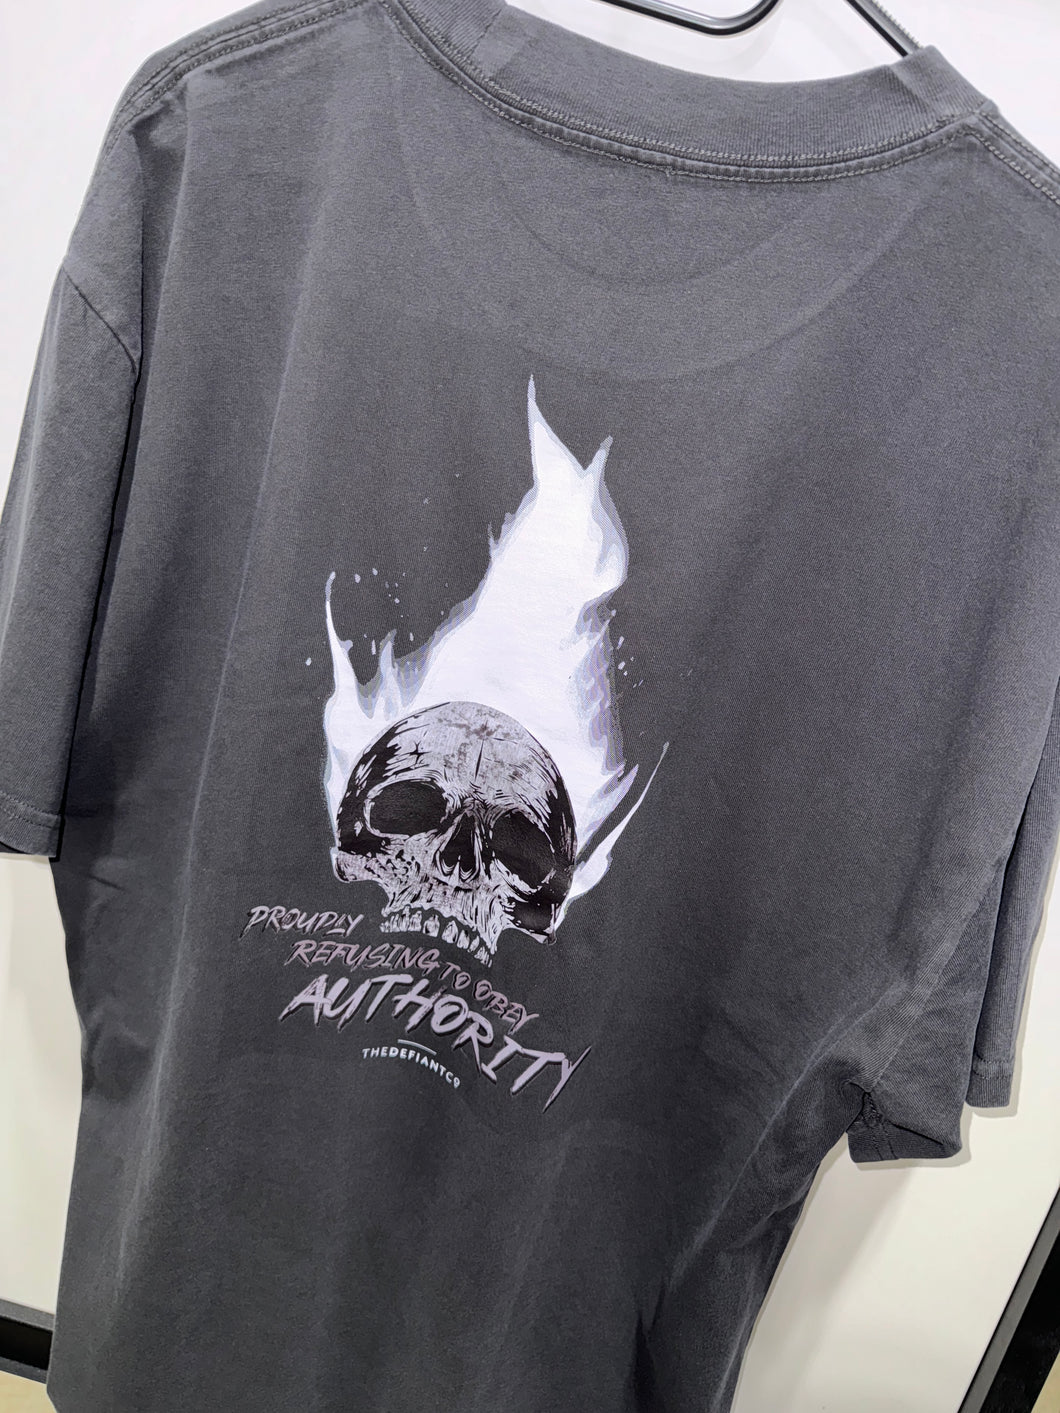 A photo showing the back of a unisex t-shirt.  The shirt has a big bold print on the back of a skull in flames. Underneath the skull is the defiant tag line 'Proudly Refusing To Obey Authority' with the The Defiant Co logo under that. The t-shirt is faded coal in colour.